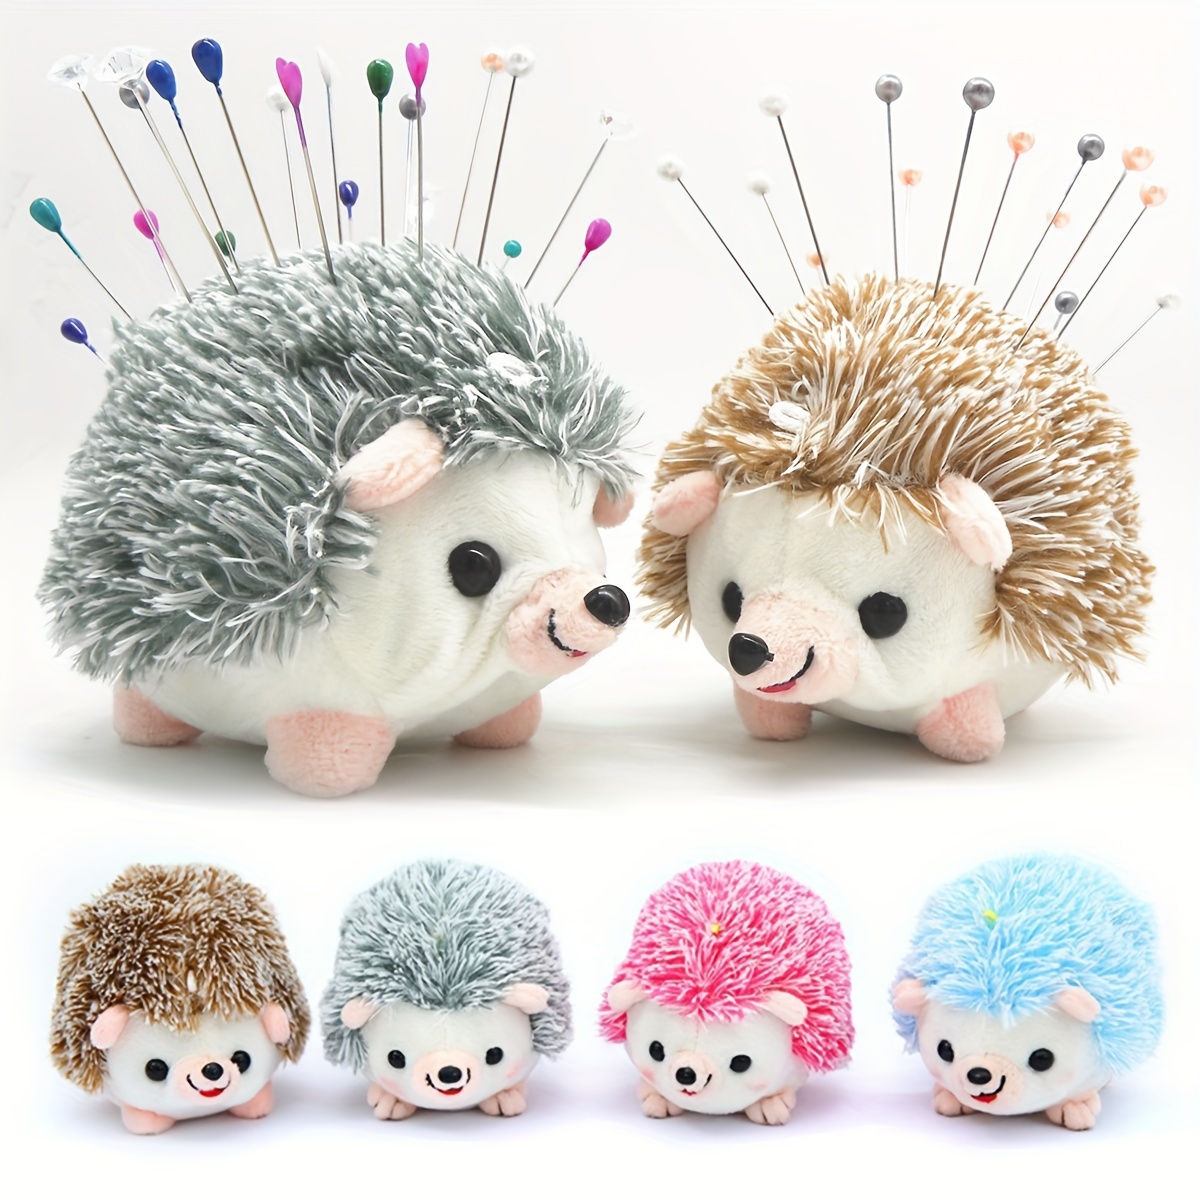 Pin Cushion, Cute Hedgehog Shape Pin Cushion Sewing Needle Cushions Holder Sewing Accessory for Sewing DIY Crafts, Size: 2.8 x 4.1 x 2.6